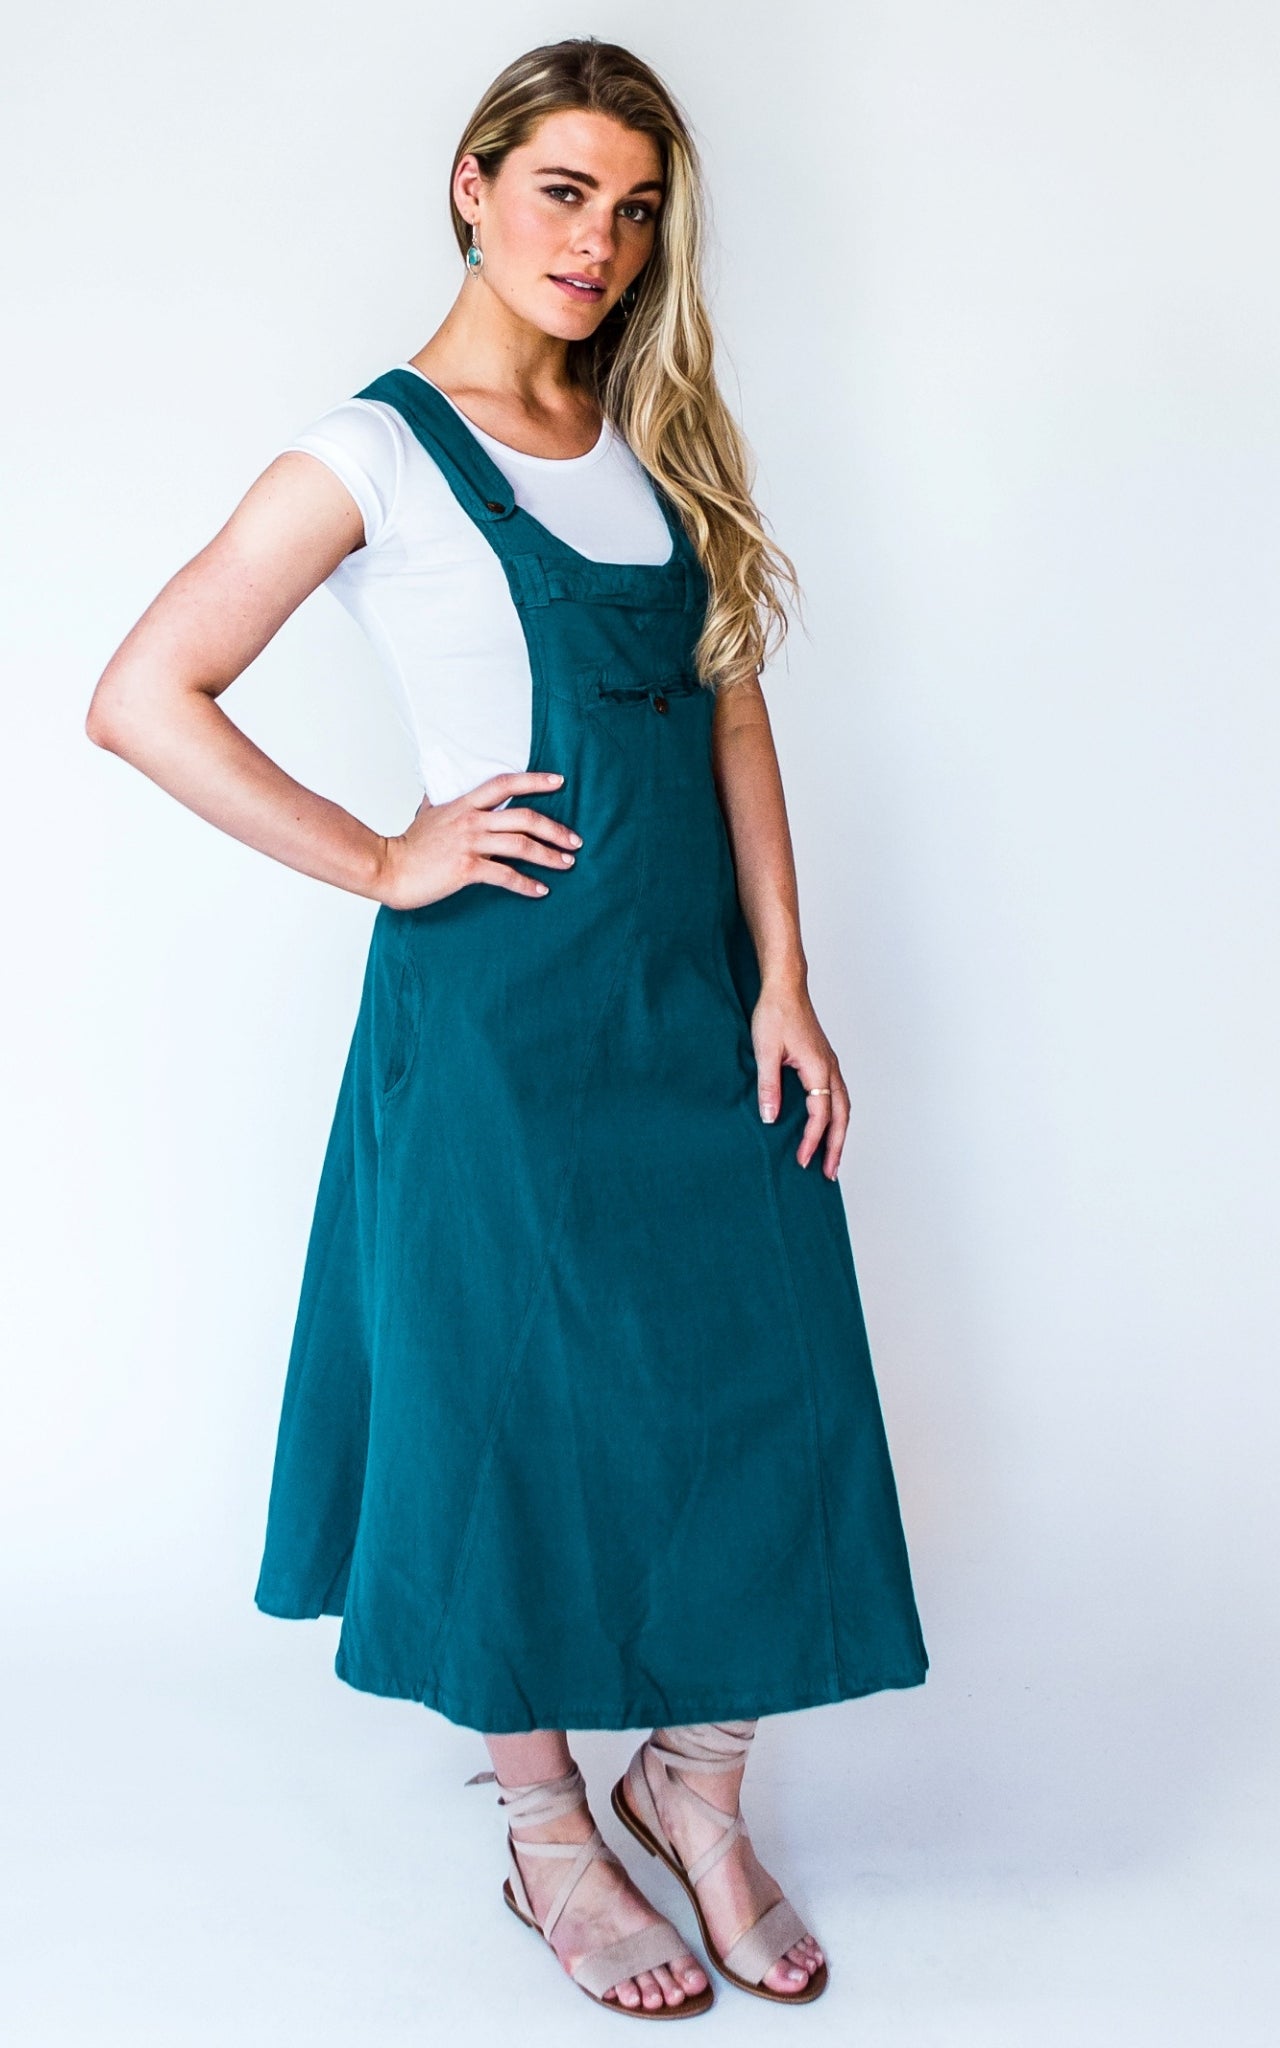 Cotton Dungaree Dress | Ethically made in Nepal – Surya